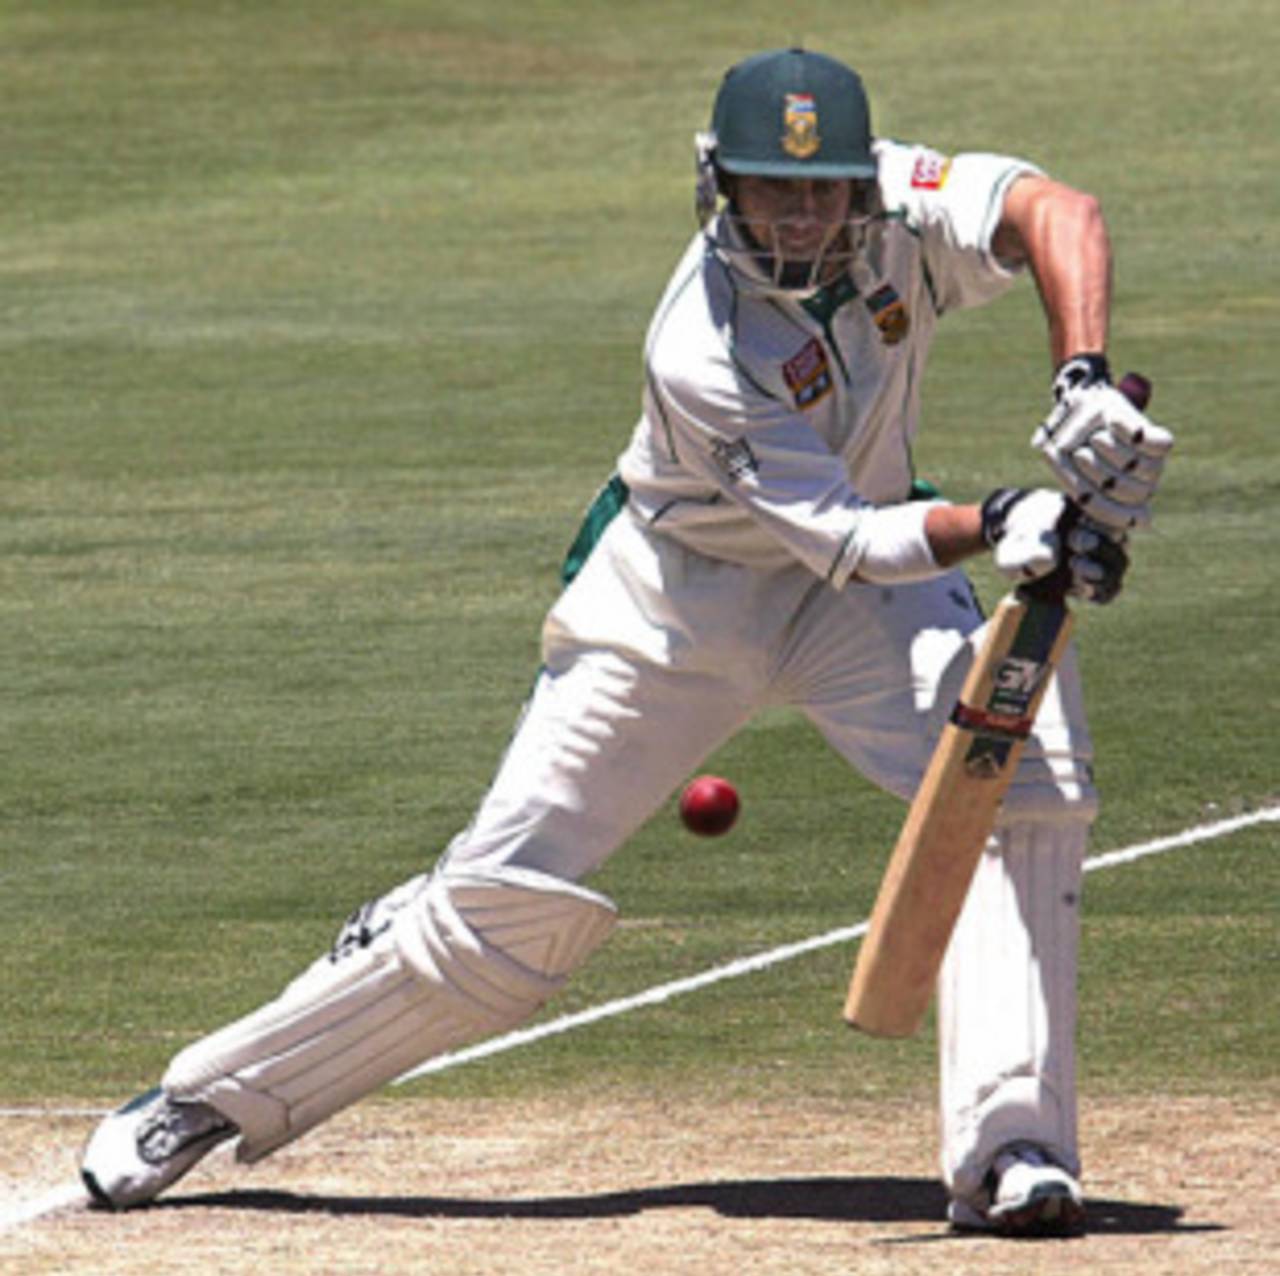 Neil KcKenzie plays a ball to the covers, South Africa v West Indies, Johannesburg, December 13, 2003 